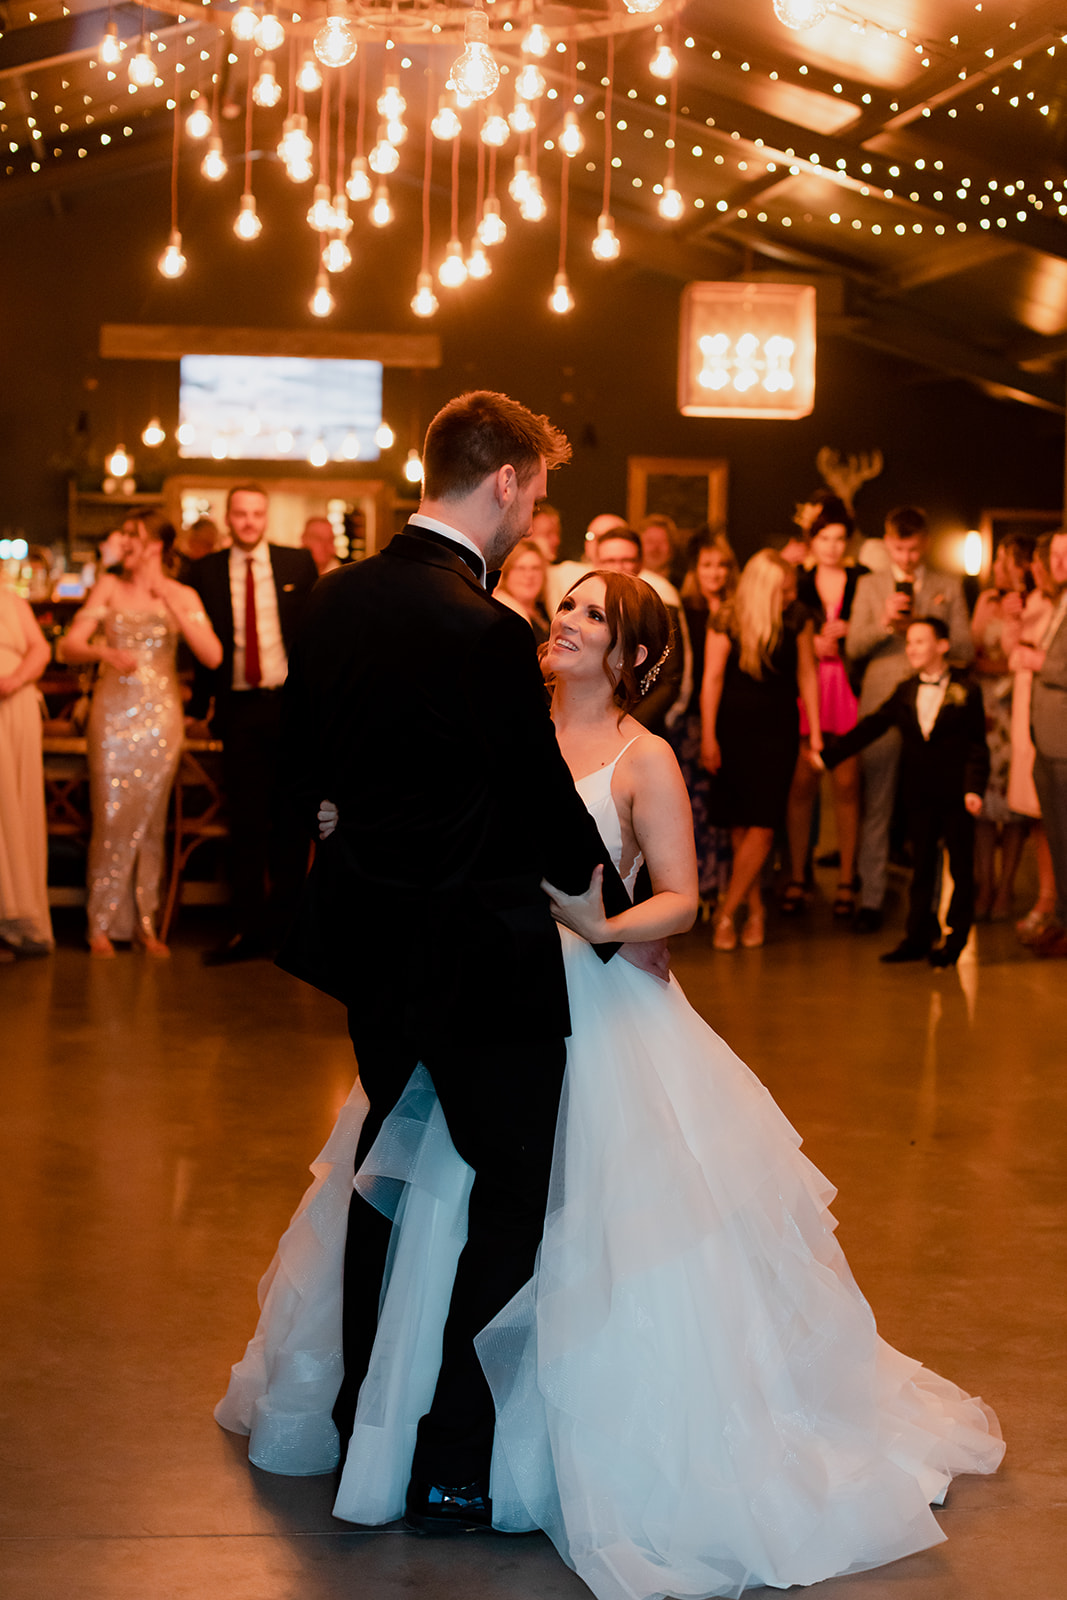 Couple dancing at the wedding reception